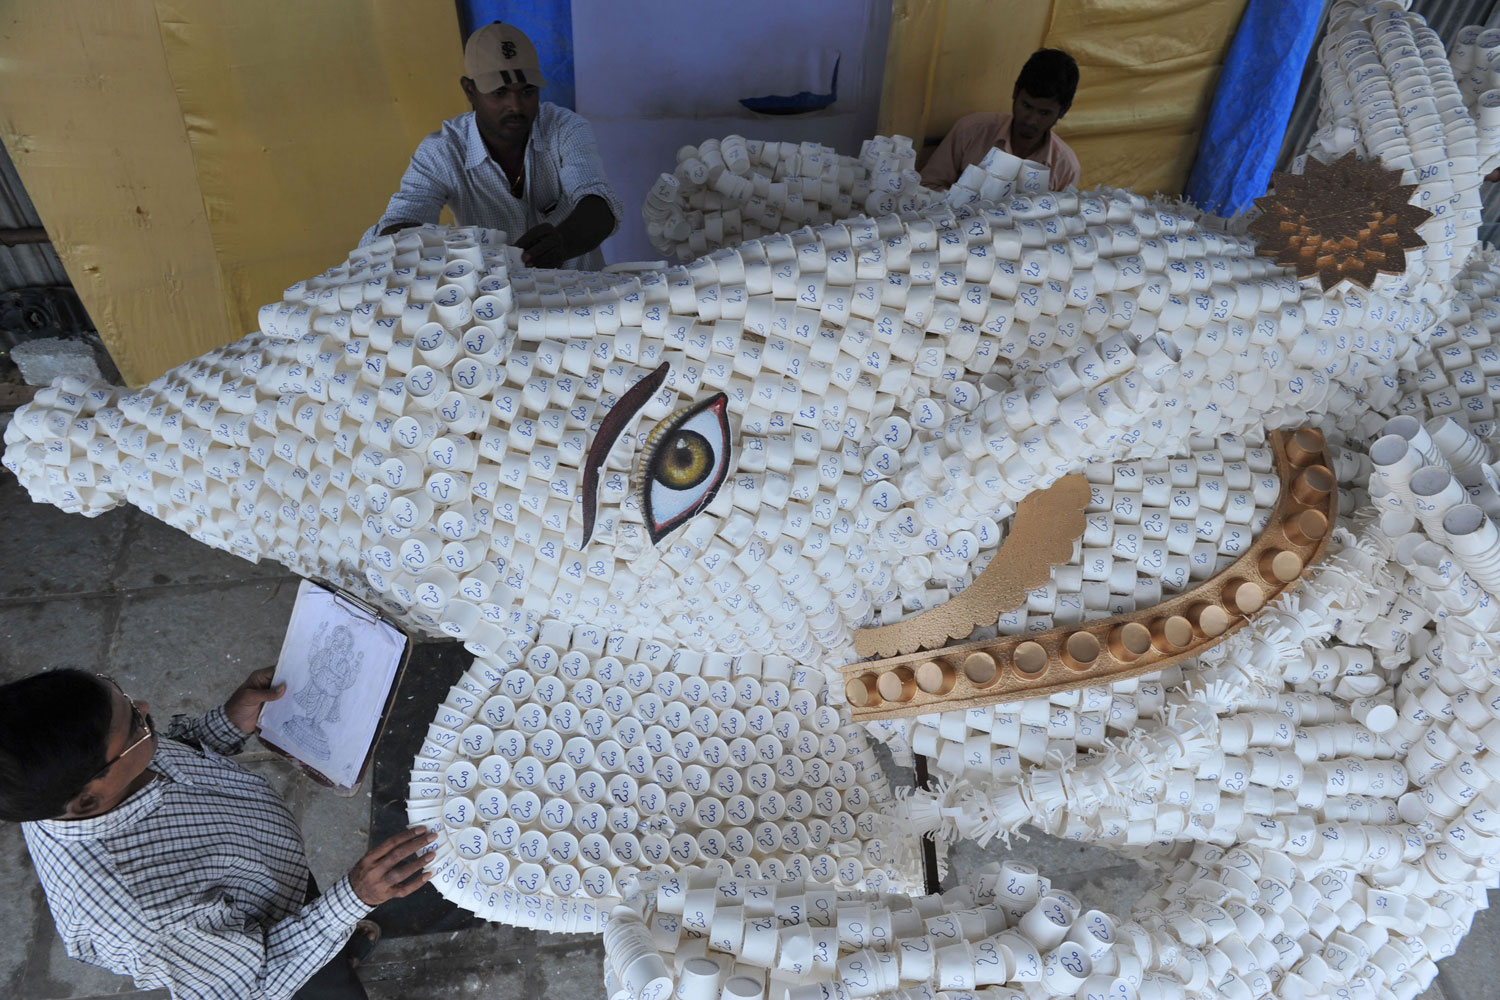 August 29, 2011. An eco-conscious designer gives final instructions for building a environmentally friendly version of Ganesh, the Hindu god of prosperity, in Hyderabad, India. The idol is made mostly of paper cups, which will pose less of an ecological hazard when, as tradition dictates, the decorated model is submerged in the river after the celebration.